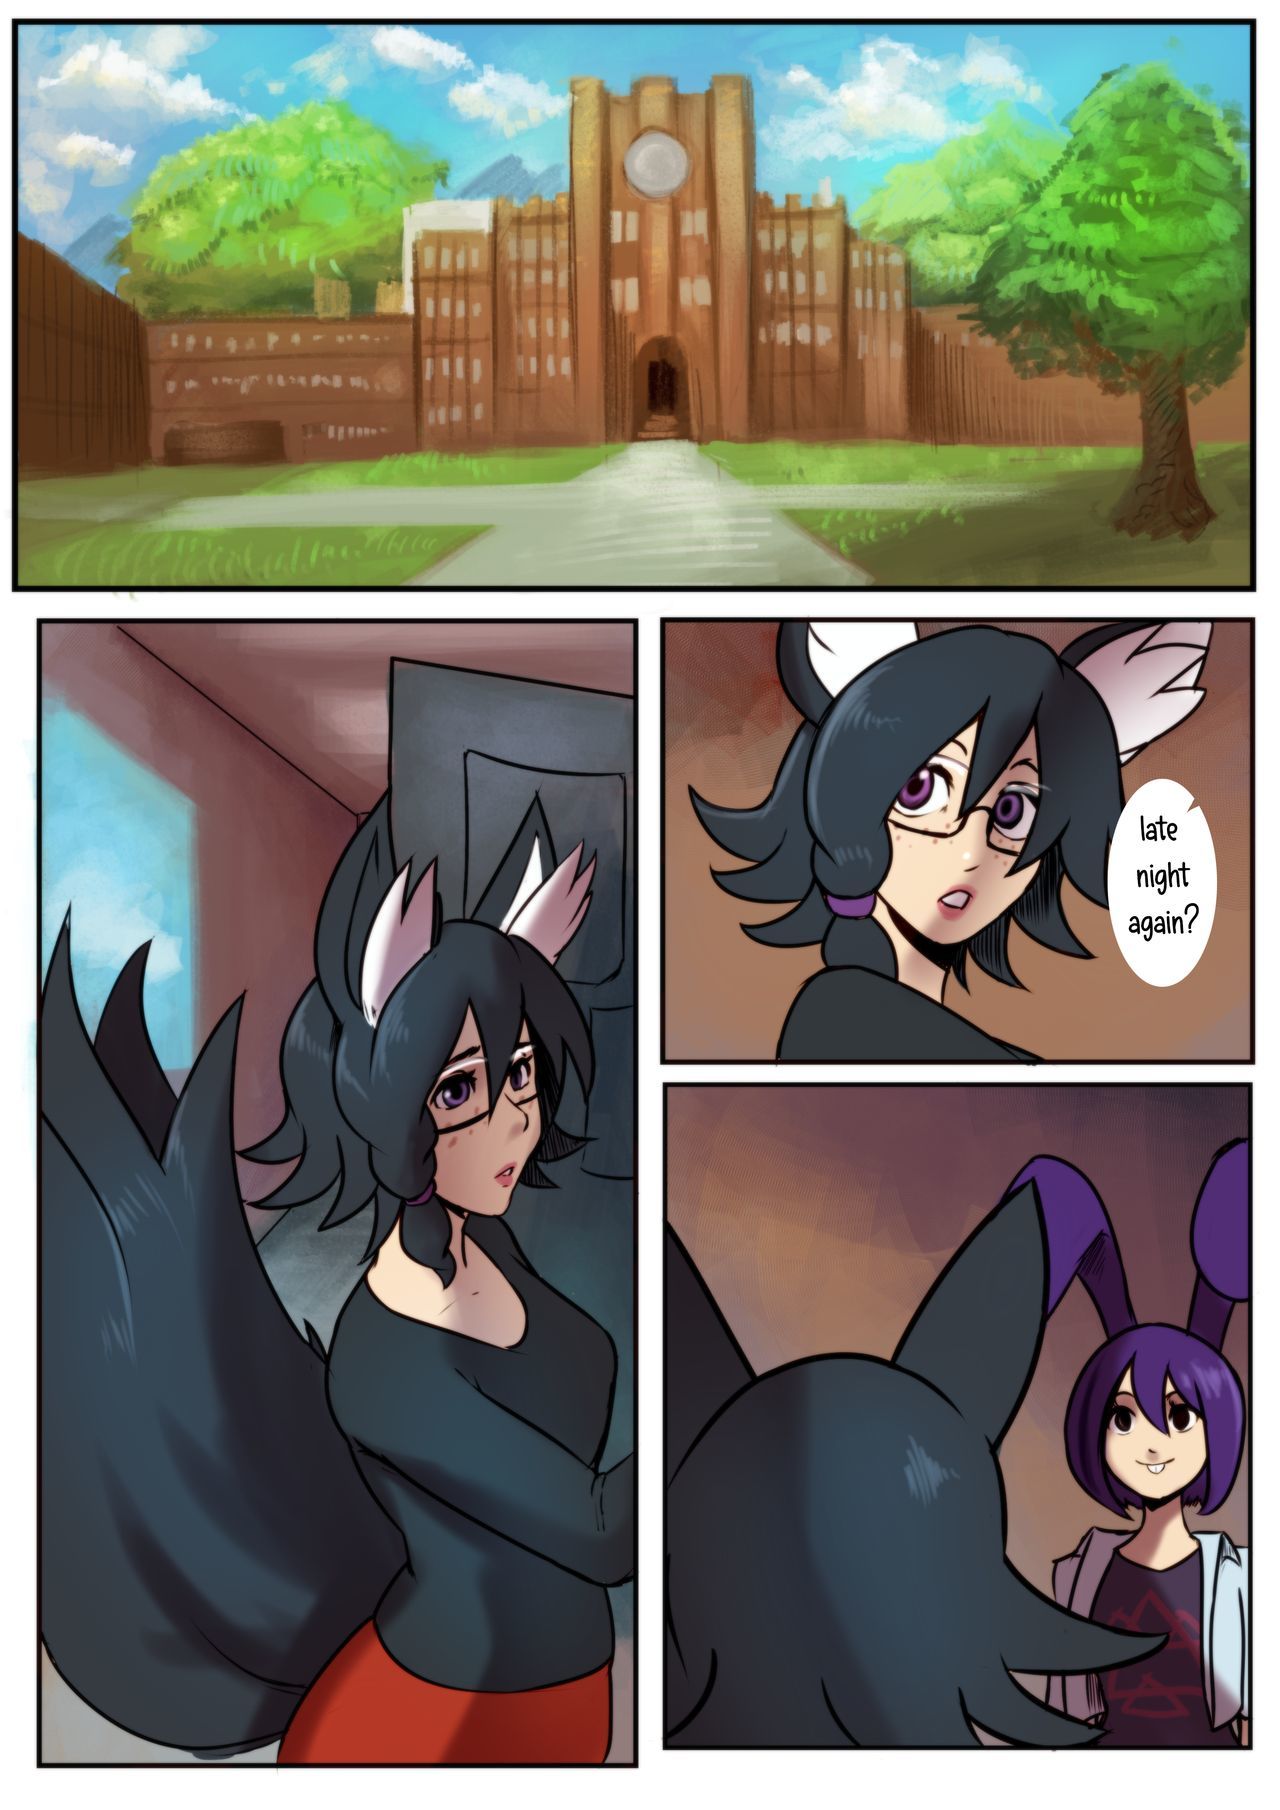 A Semblance of Serenity by Lemonfont page 7